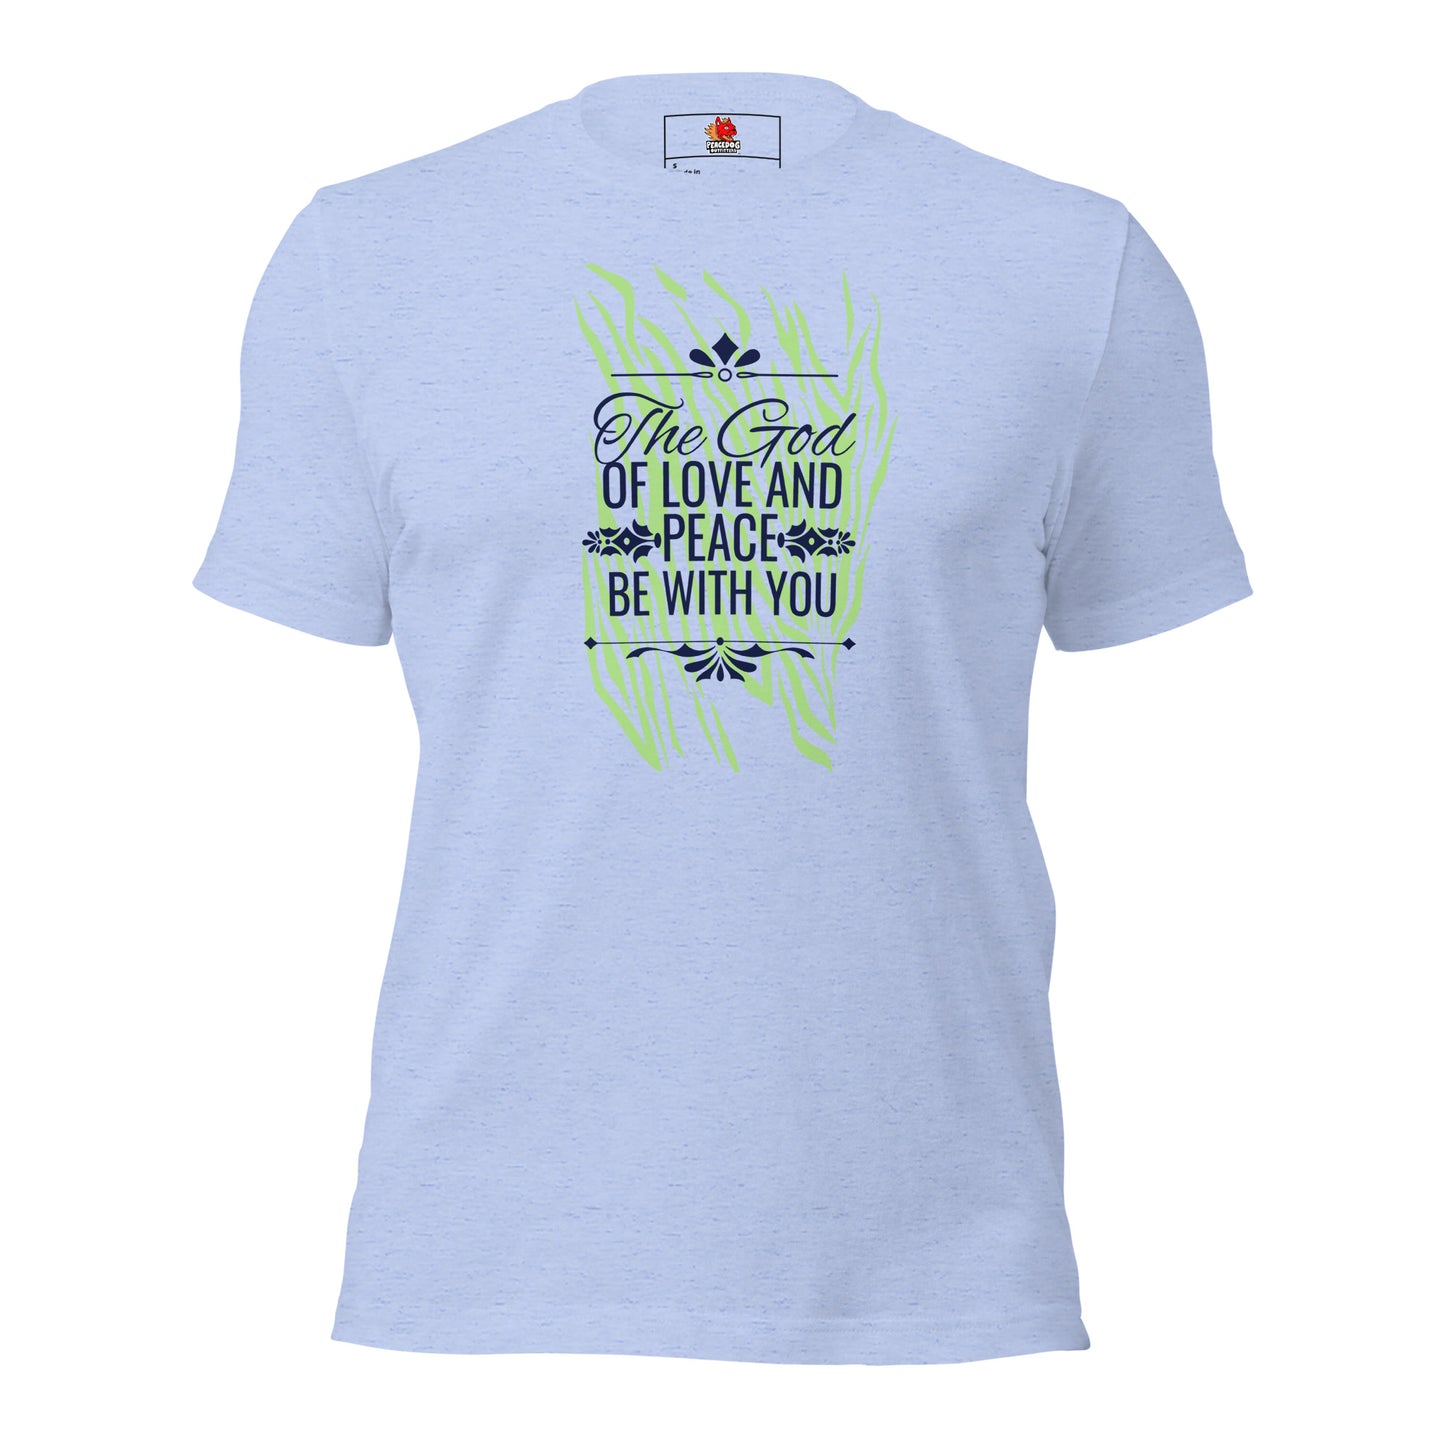 The God of love and peace be with you.  T-Shirt